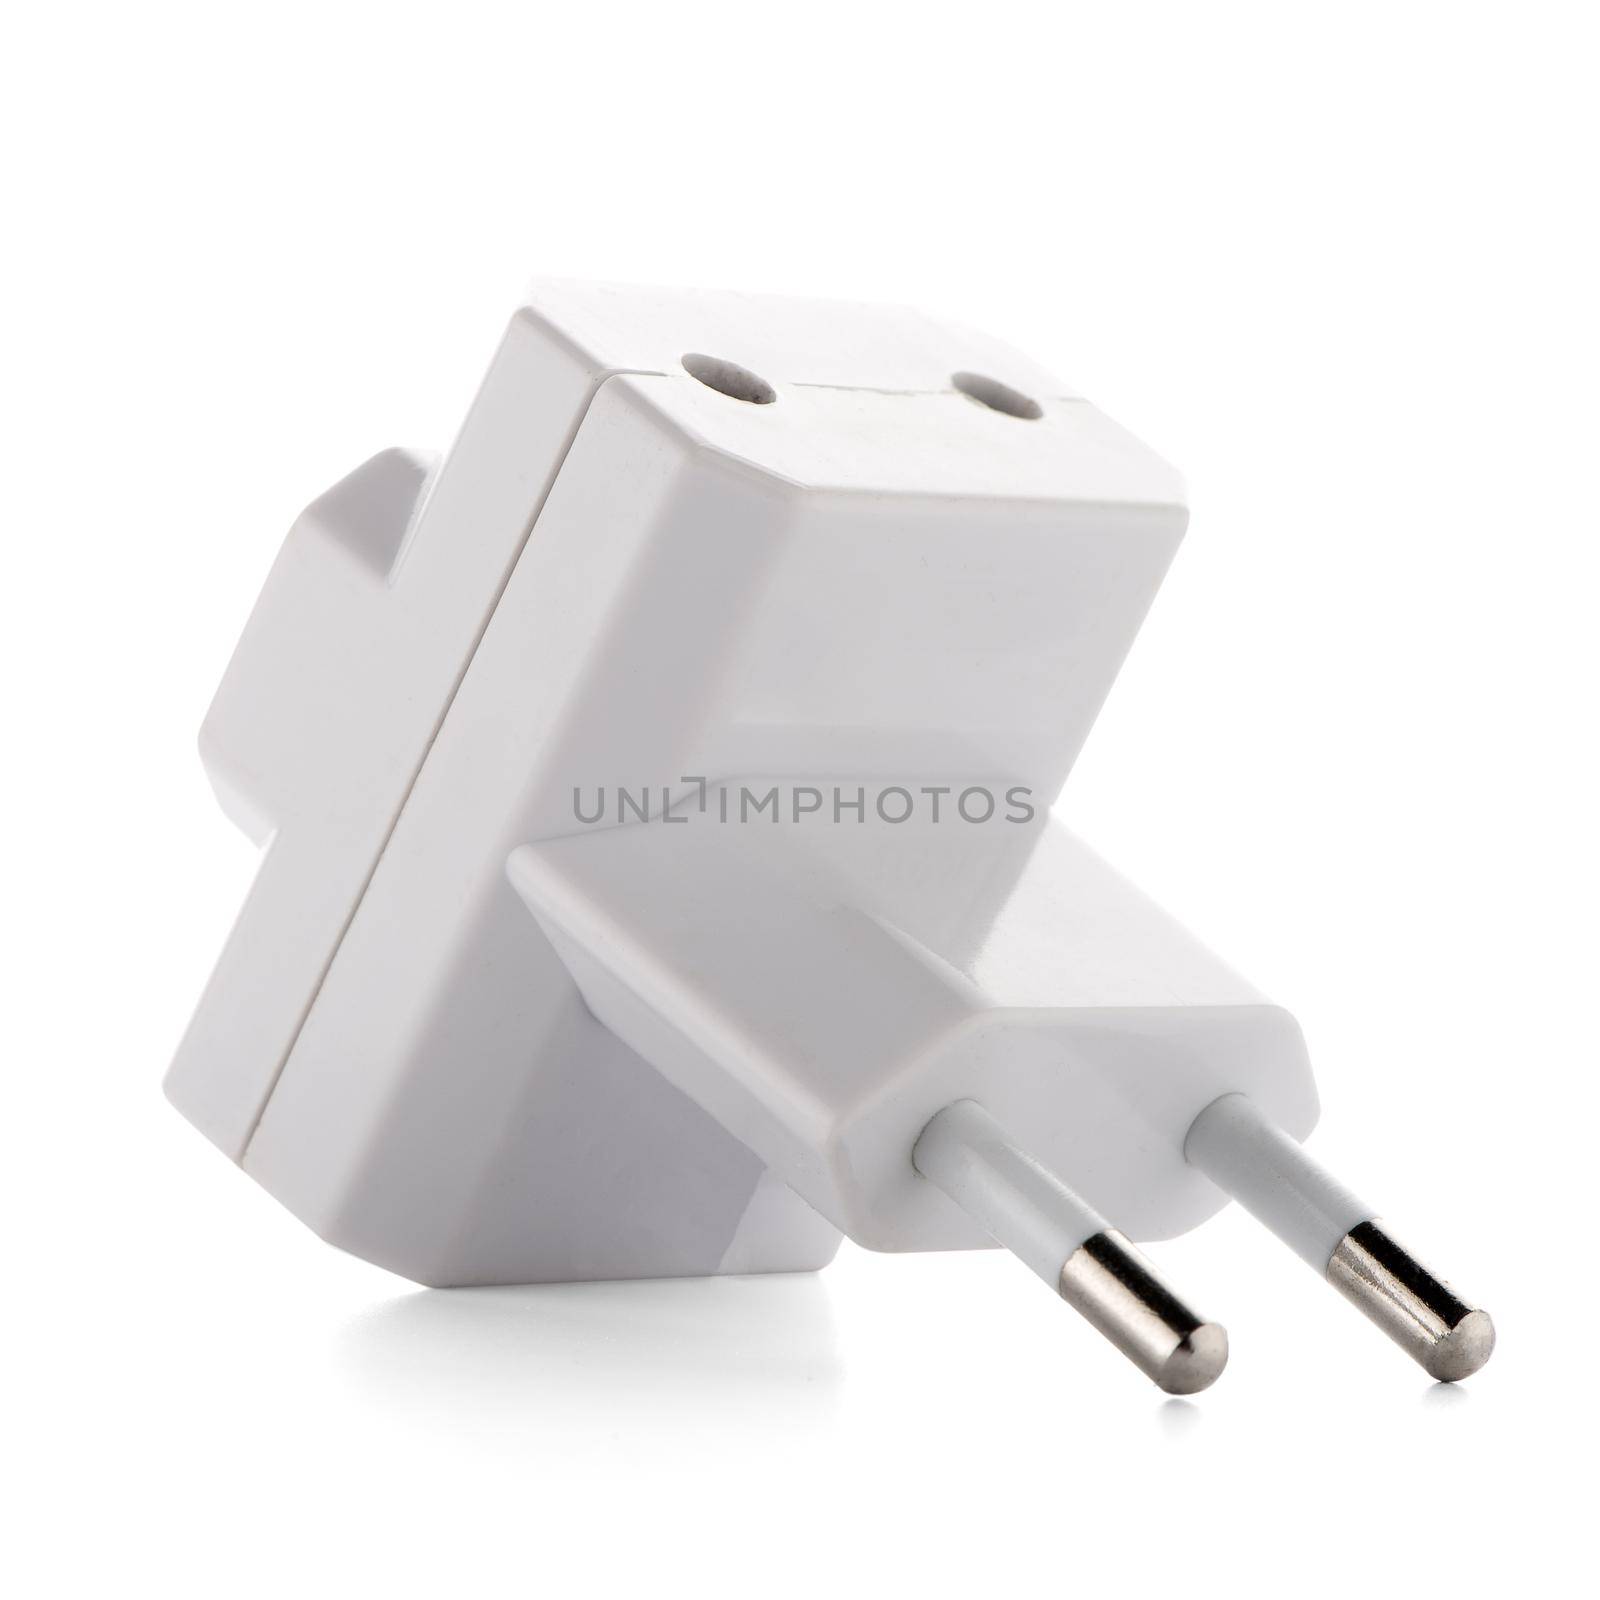 Triple Outlet Tap. Electric energy adapter used to split socket outlet. Isolated on white background.